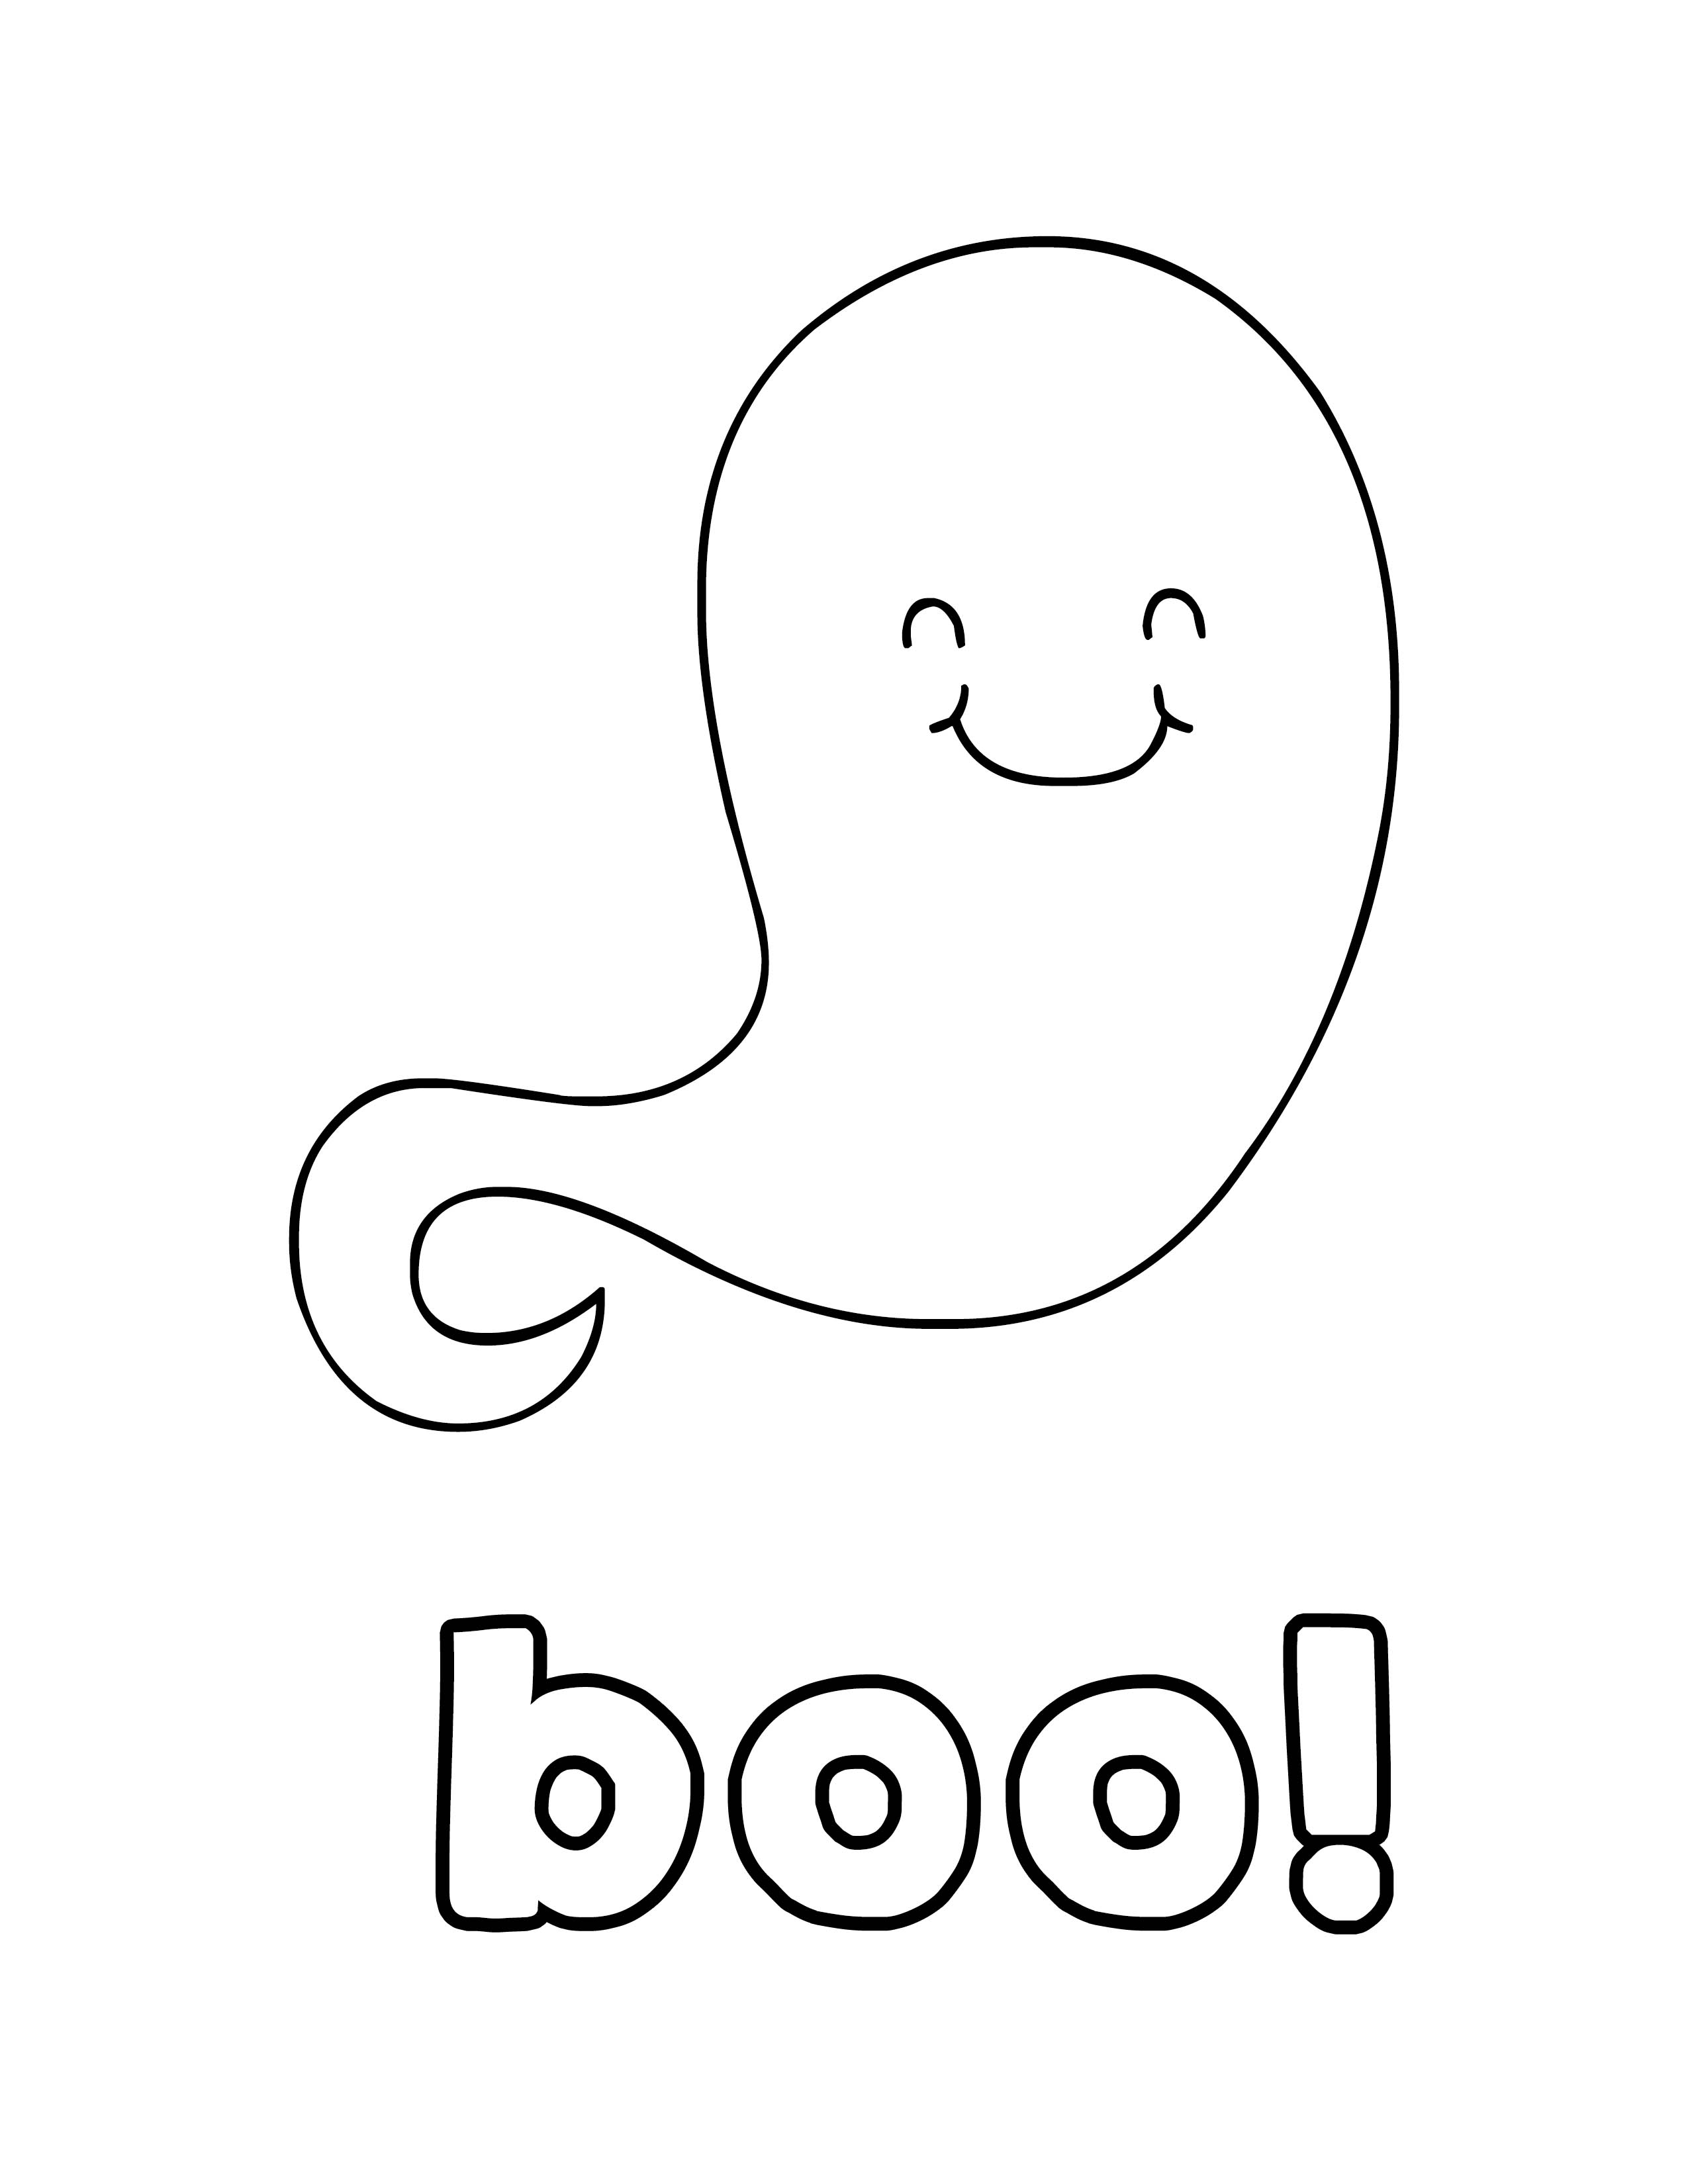 Halloween Coloring Pages -ghost boo- free printable coloring pages for kids - Misty Nelson @frostedevents